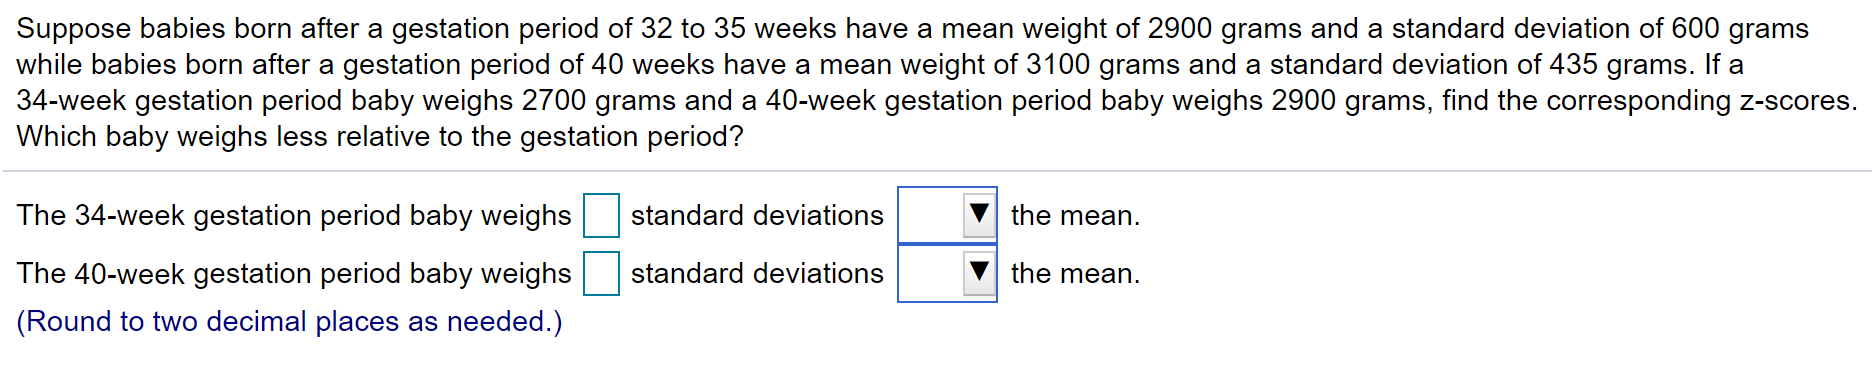 Suppose babies born after a gestation period of 32 to 35 weeks have a mean weight of 2900 grams and a standard deviation of 600 grams
while babies born after a gestation period of 40 weeks have a mean weight of 3100 grams and a standard deviation of 435 grams. If a
34-week gestation period baby weighs 2700 grams and a 40-week gestation period baby weighs 2900 grams, find the corresponding z-scores.
Which baby weighs less relative to the gestation period?
